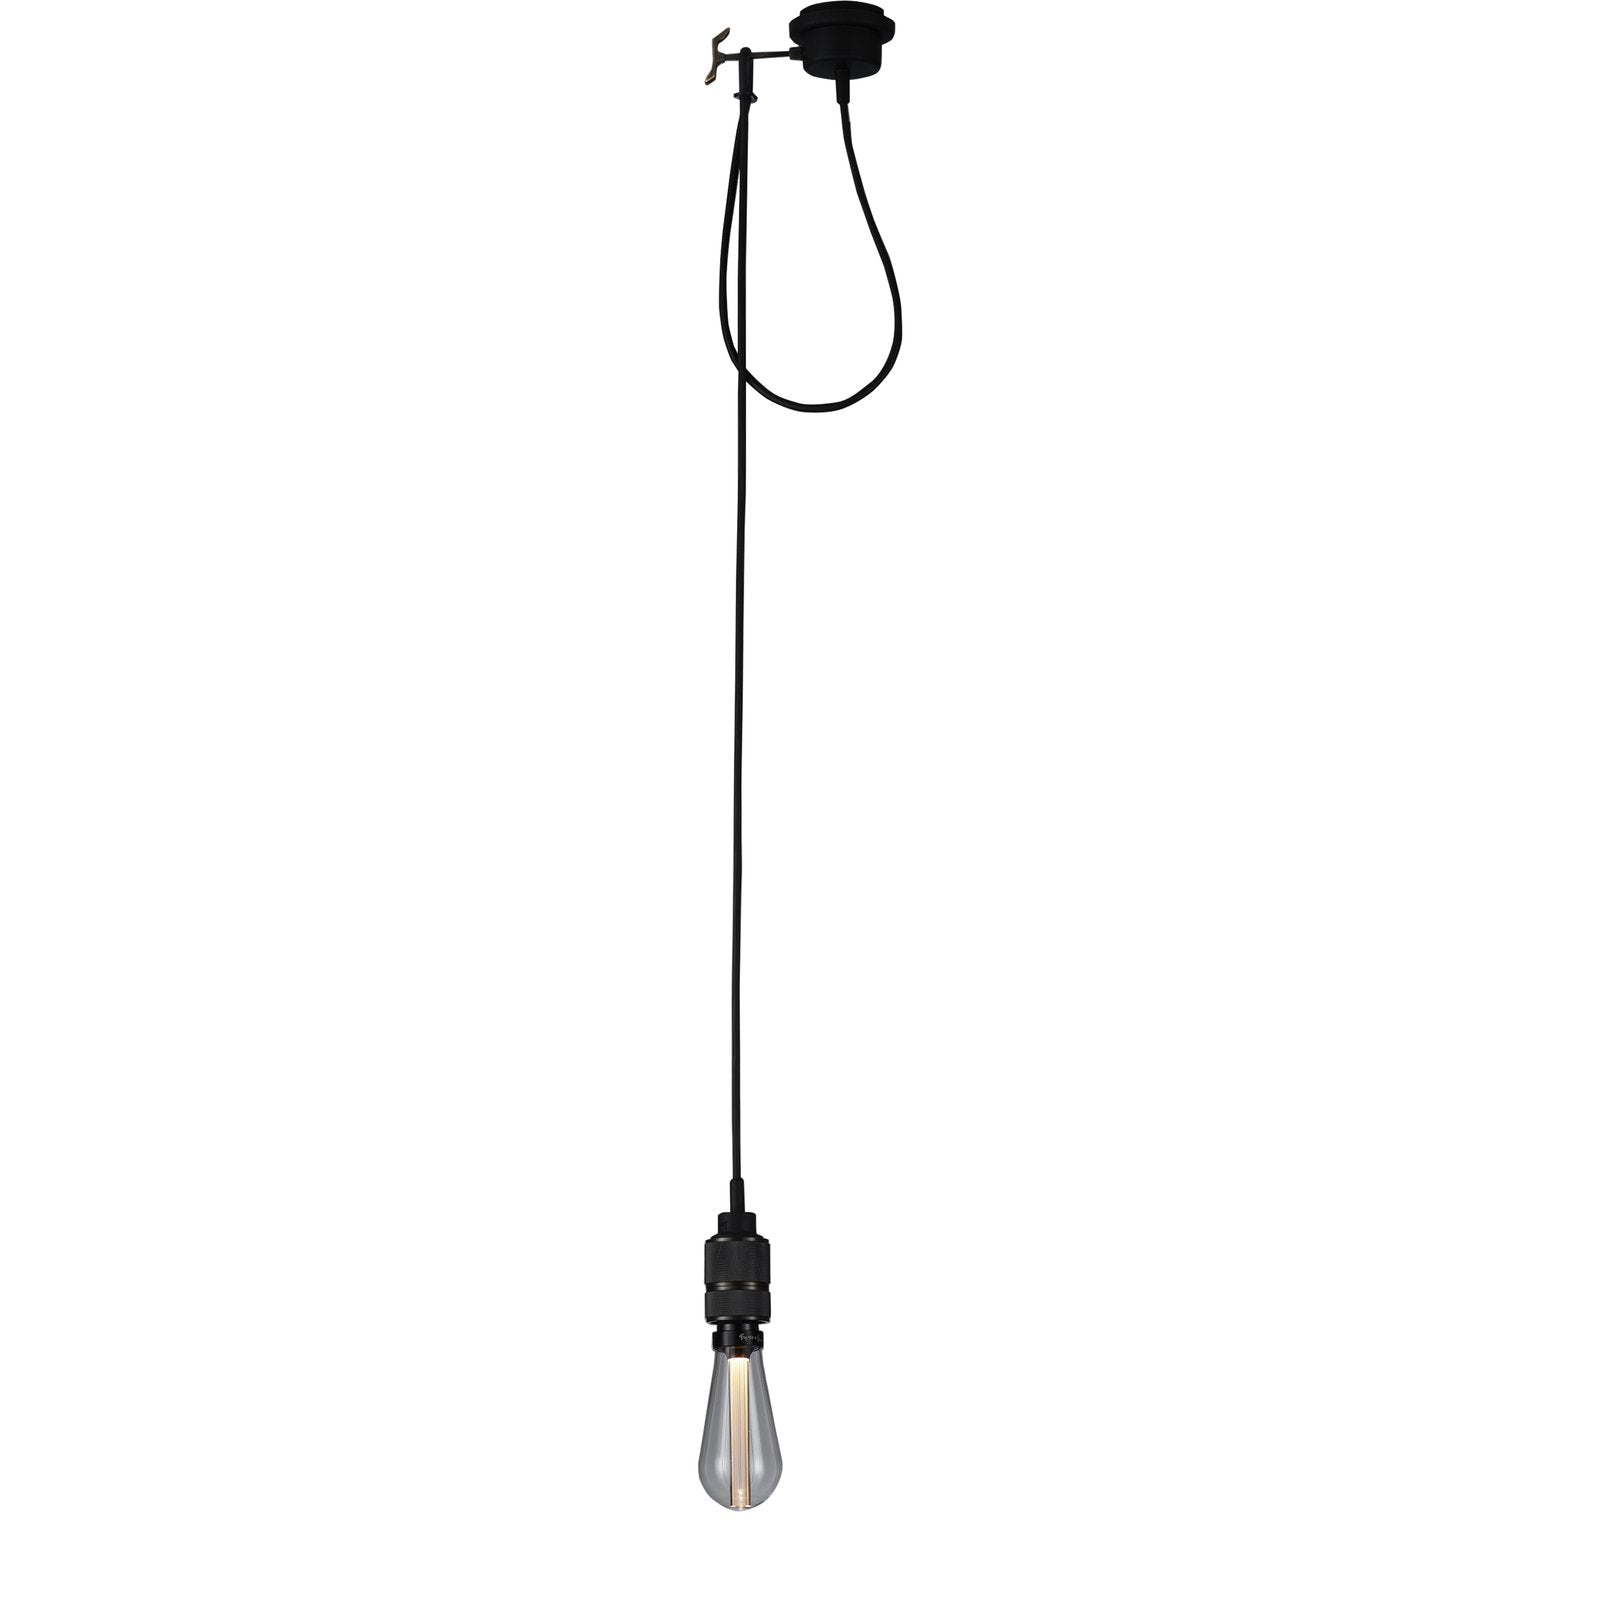 Buster and Punch - Hooked 1.0 / Nude 2.0m Hanglamp - KOOT